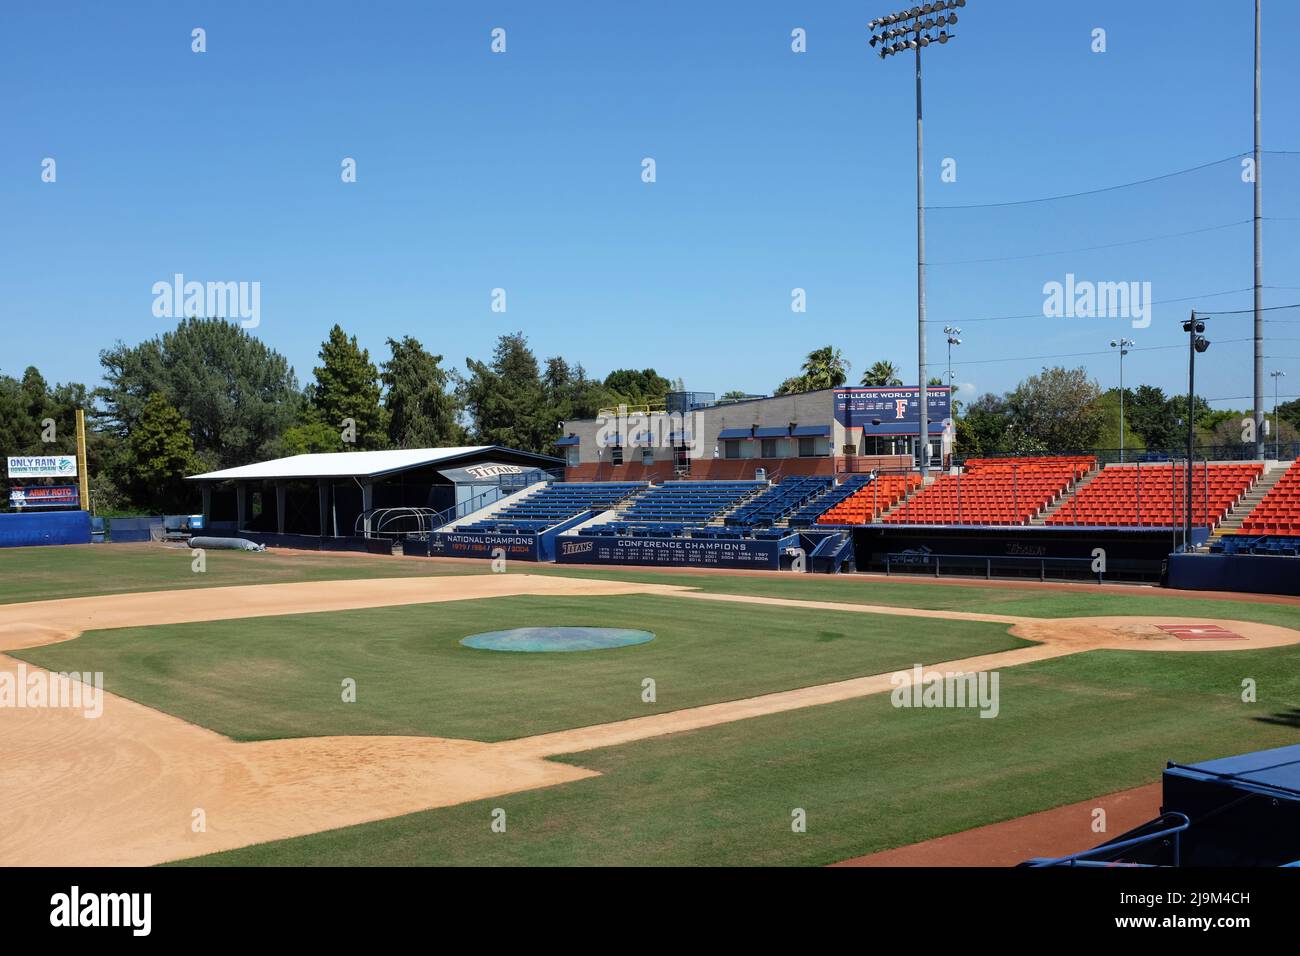 FULLERTON CALIFORNIA - 22 MAY 2020: Right Field Line seating and dugout seen from acrods the field at Goodwin Filed, on the campus of California State Stock Photo